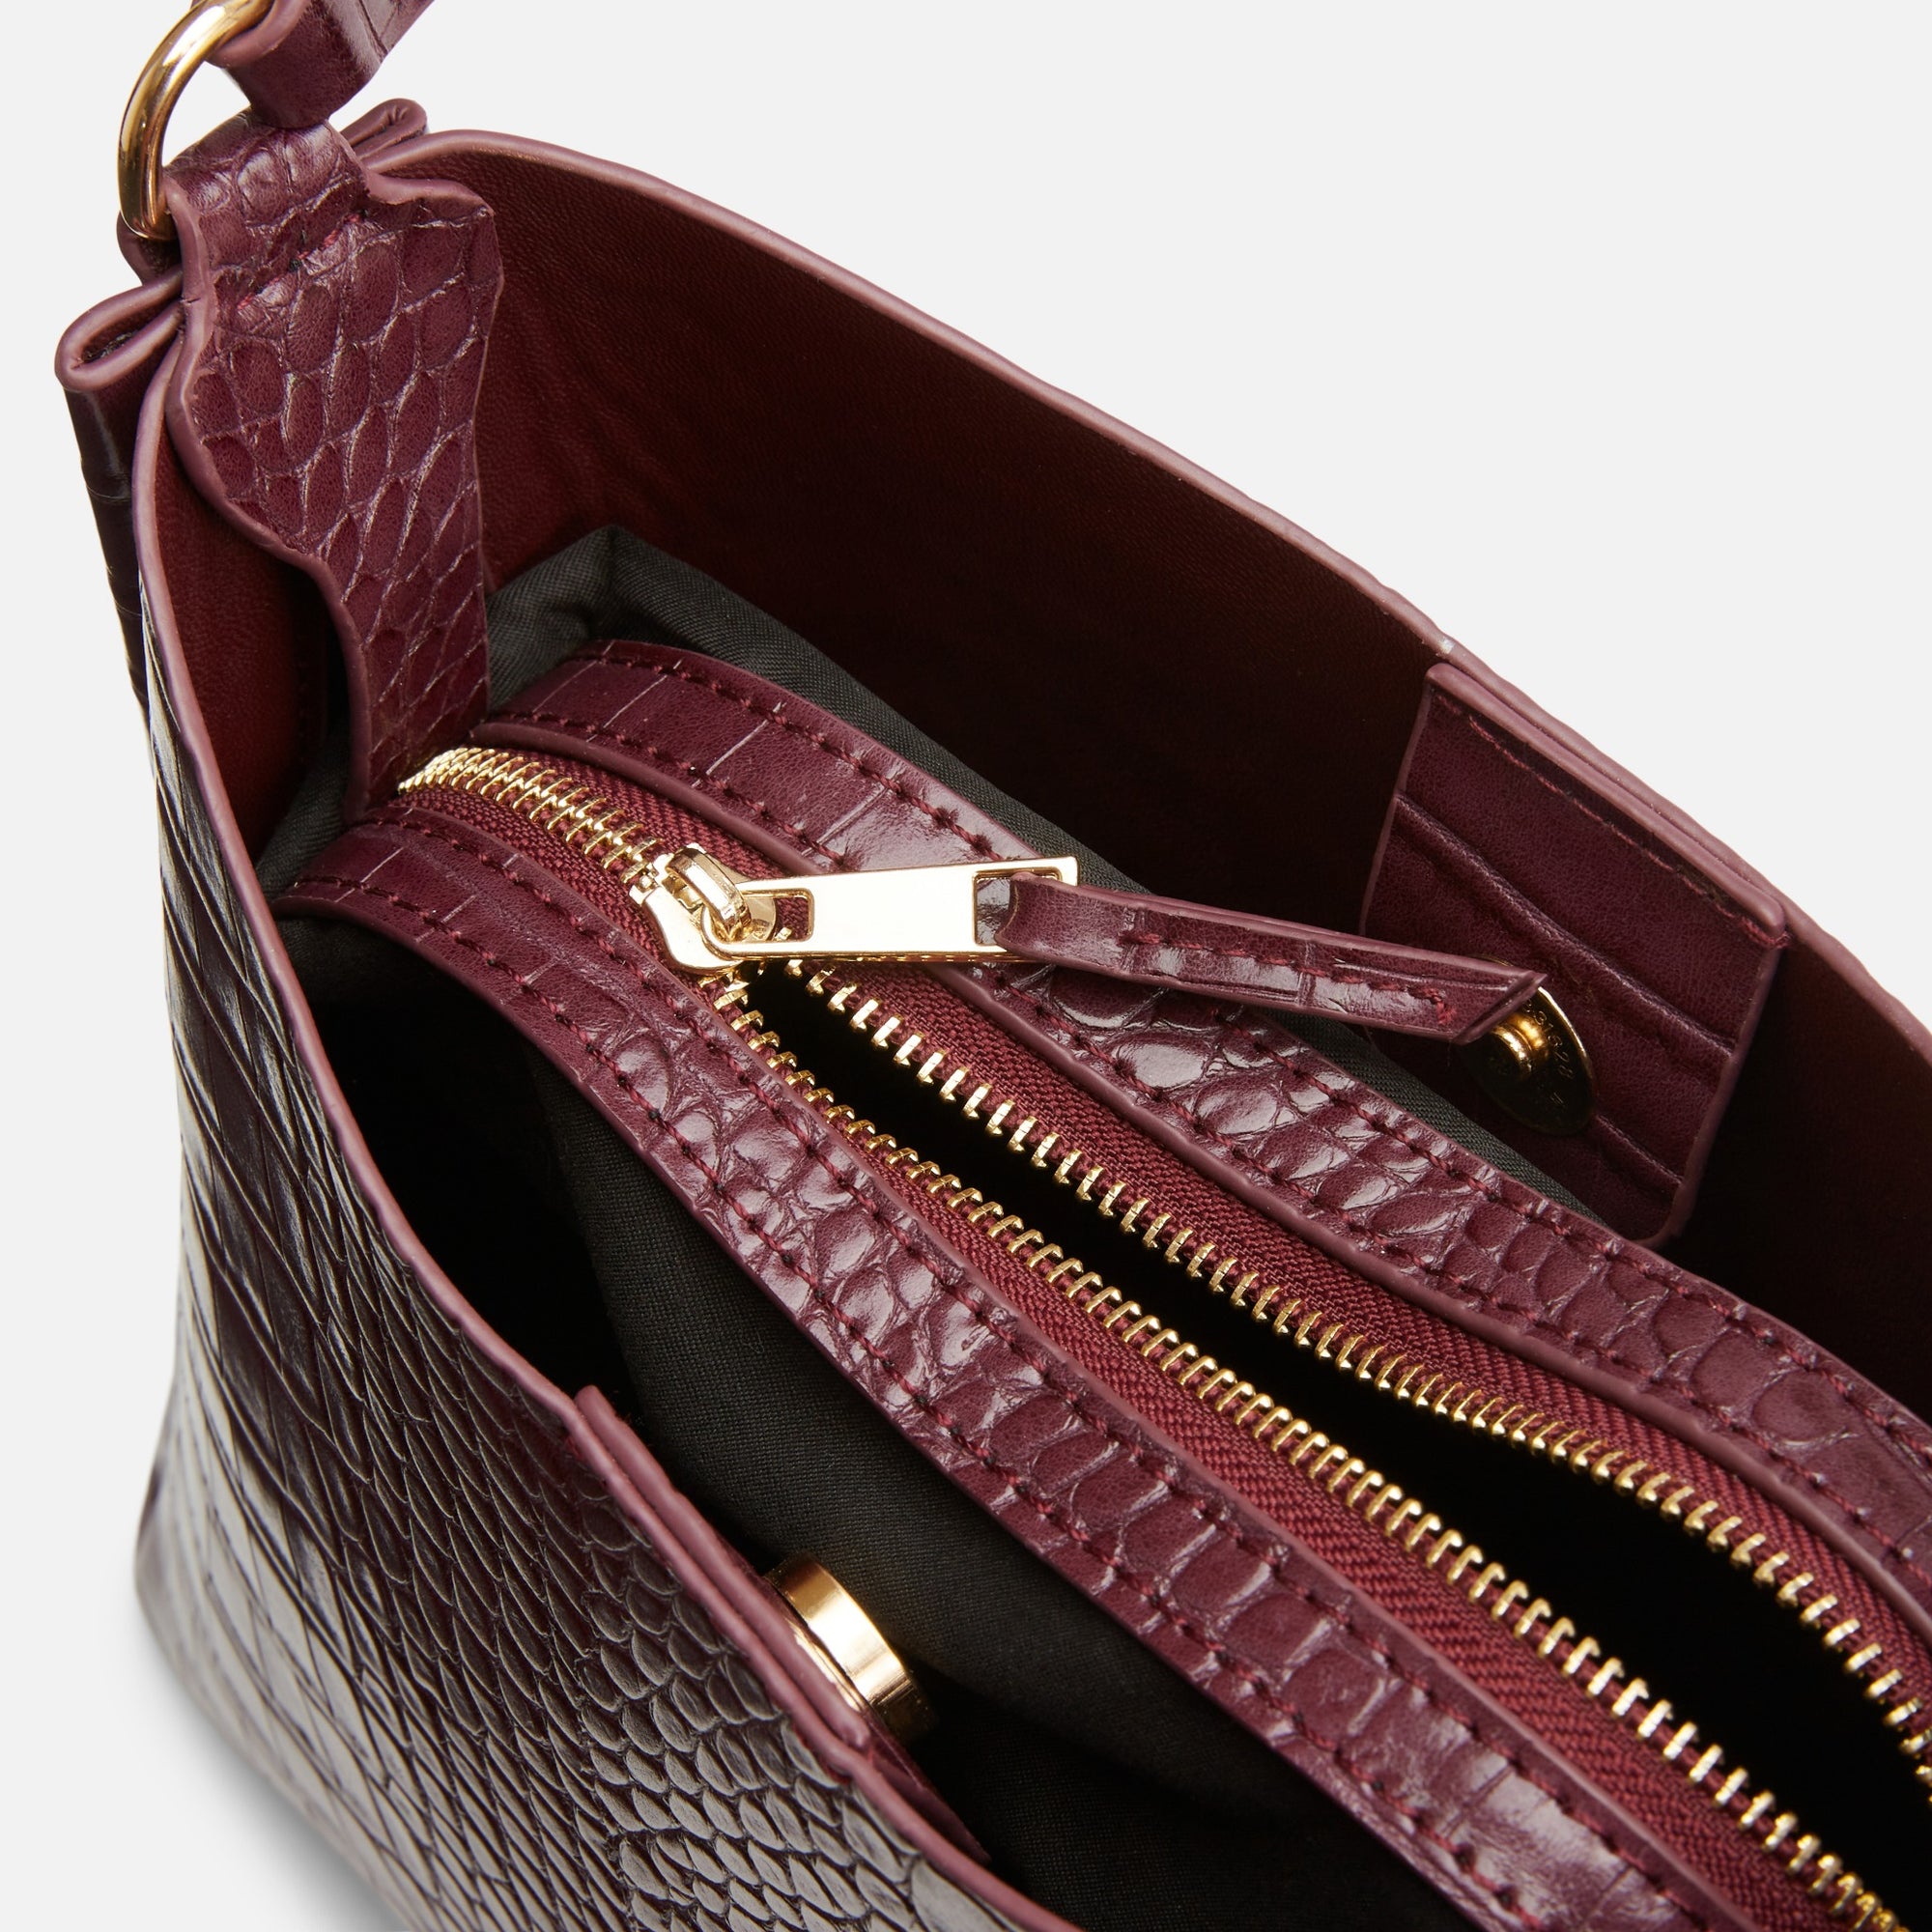 Burgundy snakeskin effect purse with handle and shoulder strap